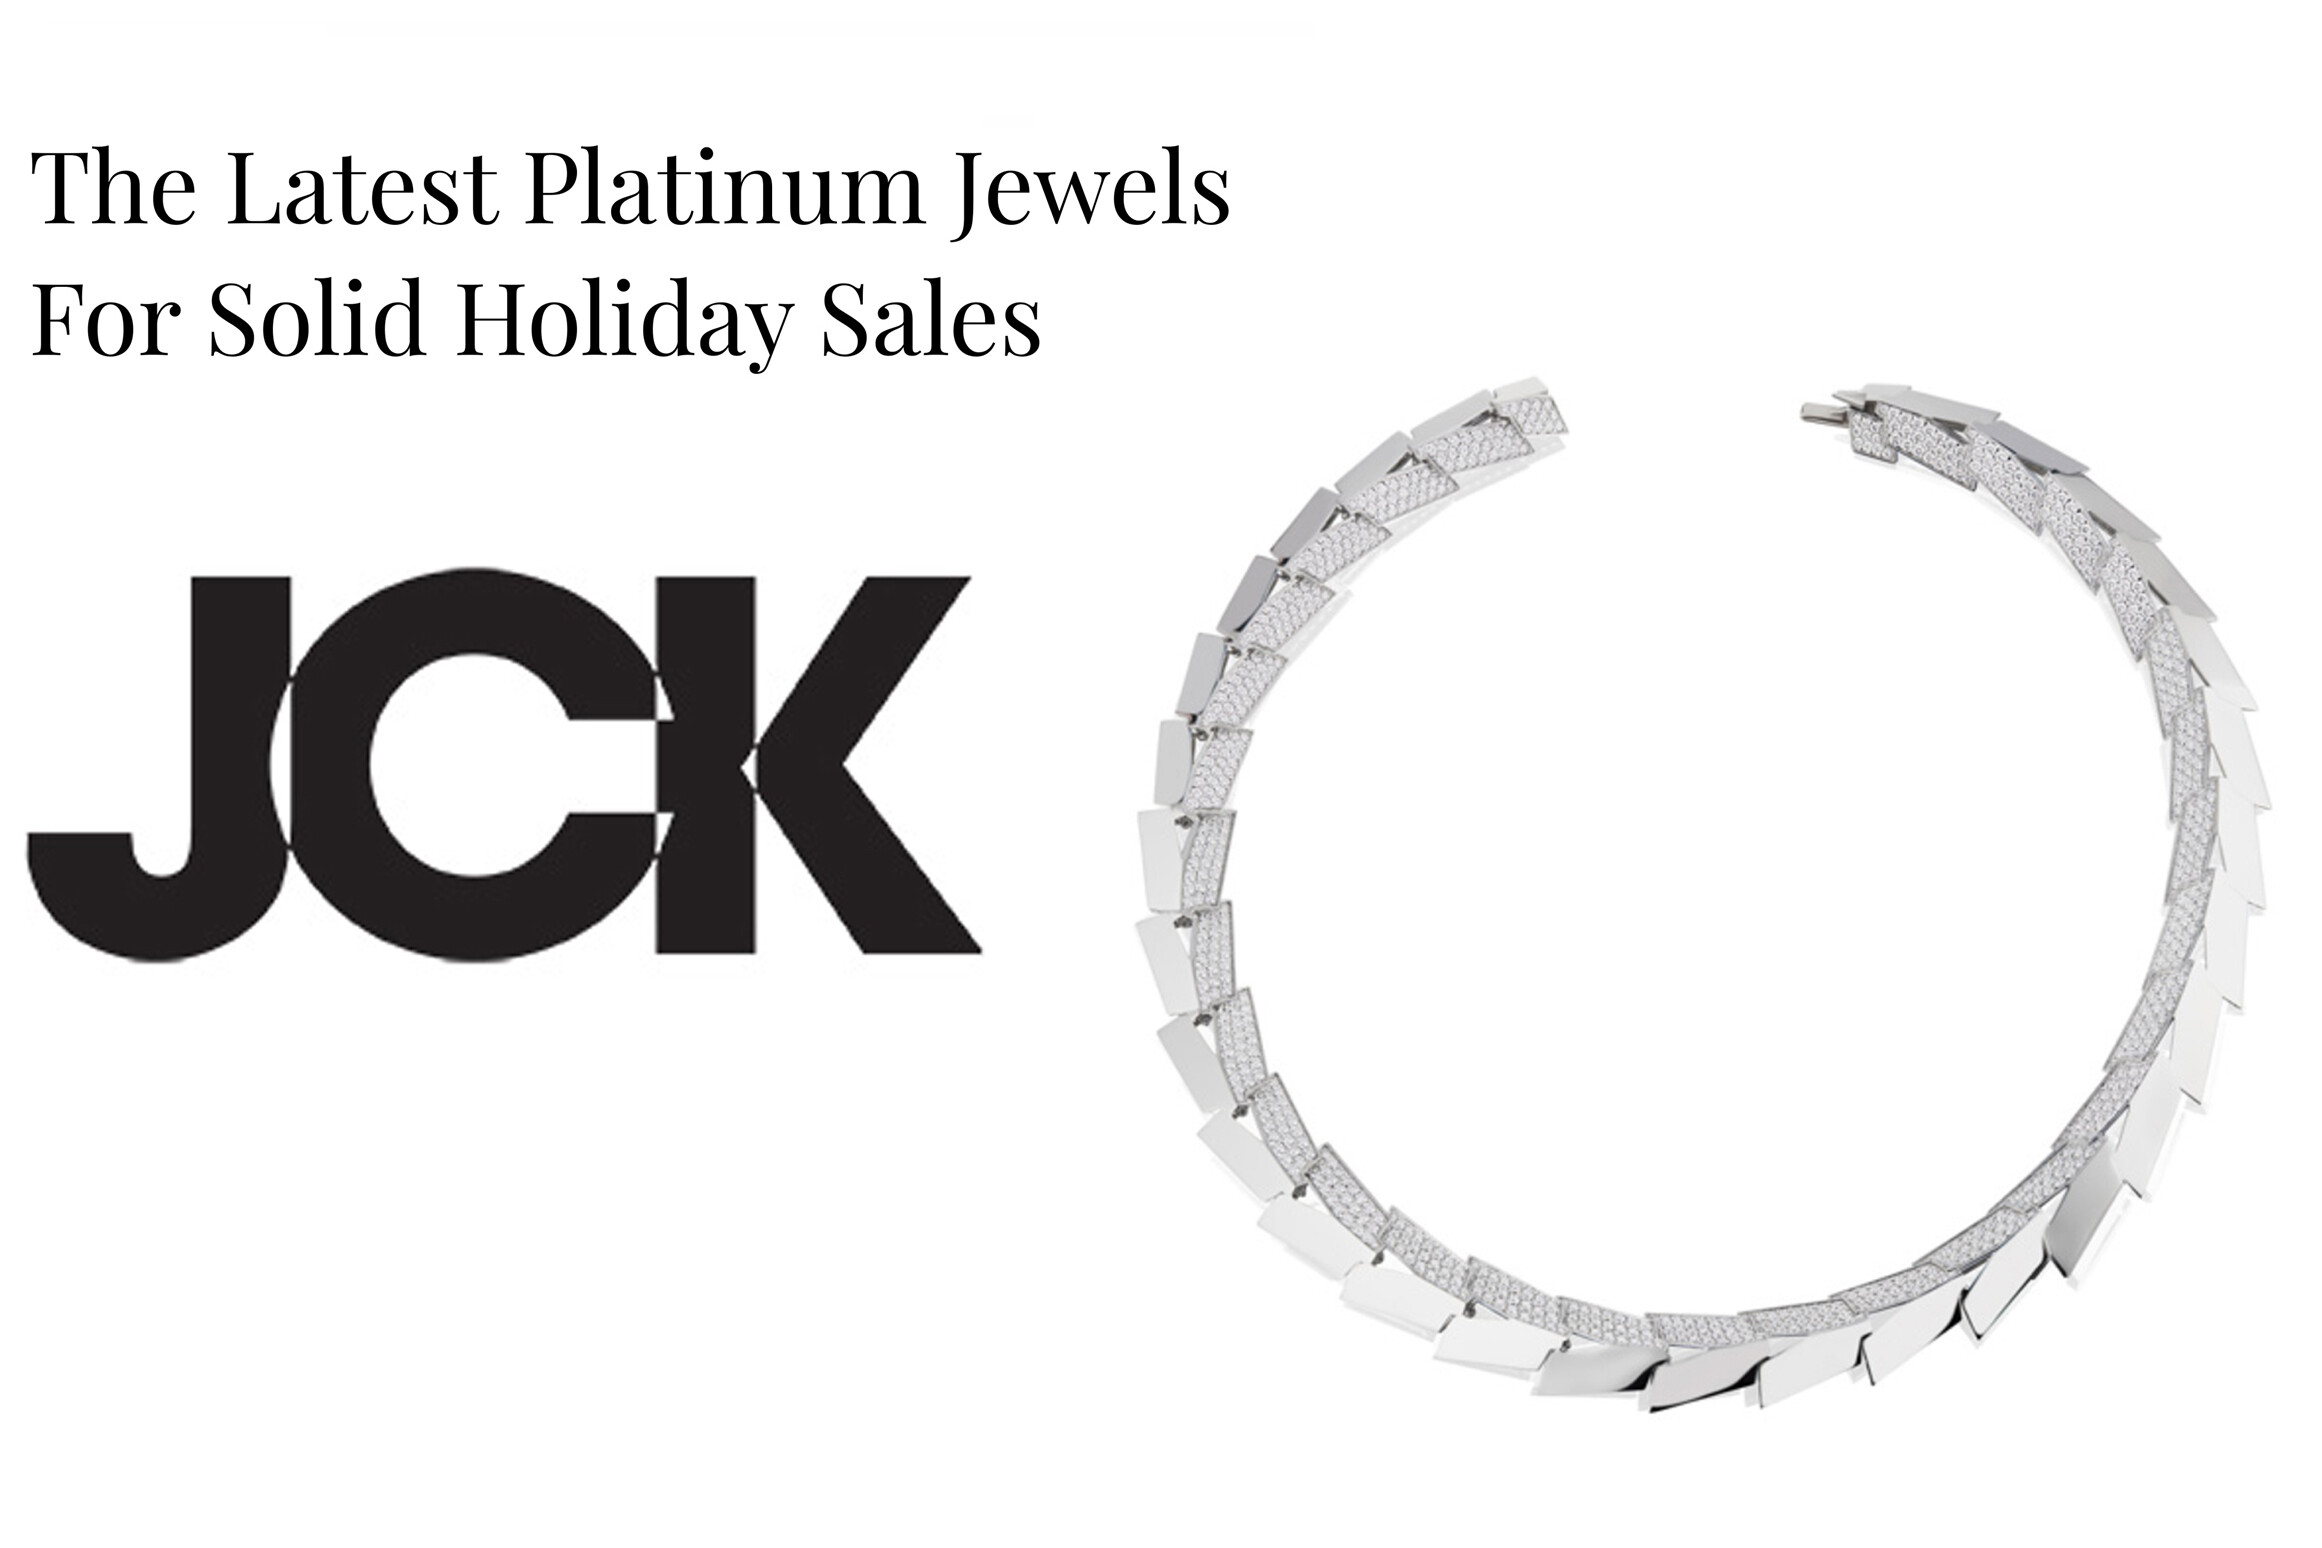 This is a graphic from JCK Magazine feature, The Latest Platinum Jewels For Solid Holiday Sales. Pictured is the Renisis Light Halo Necklace by artist and designer, Sardwell. It is crafted platinum with pavé diamonds and is constructed in small segments that are sharp and resembles armor.